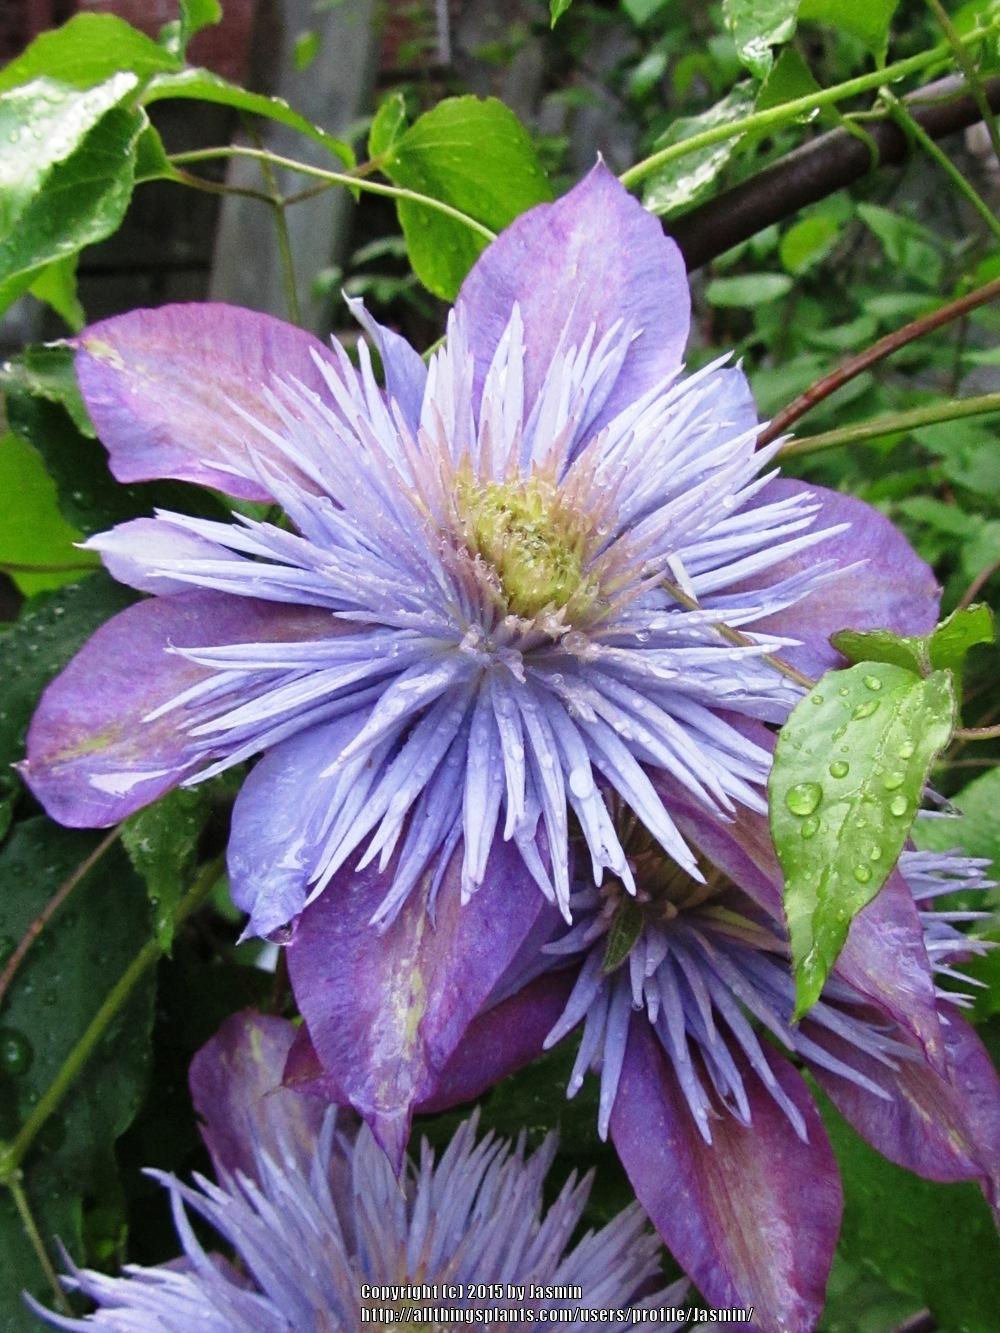 Photo of Clematis Crystal Fountain™ uploaded by Jasmin